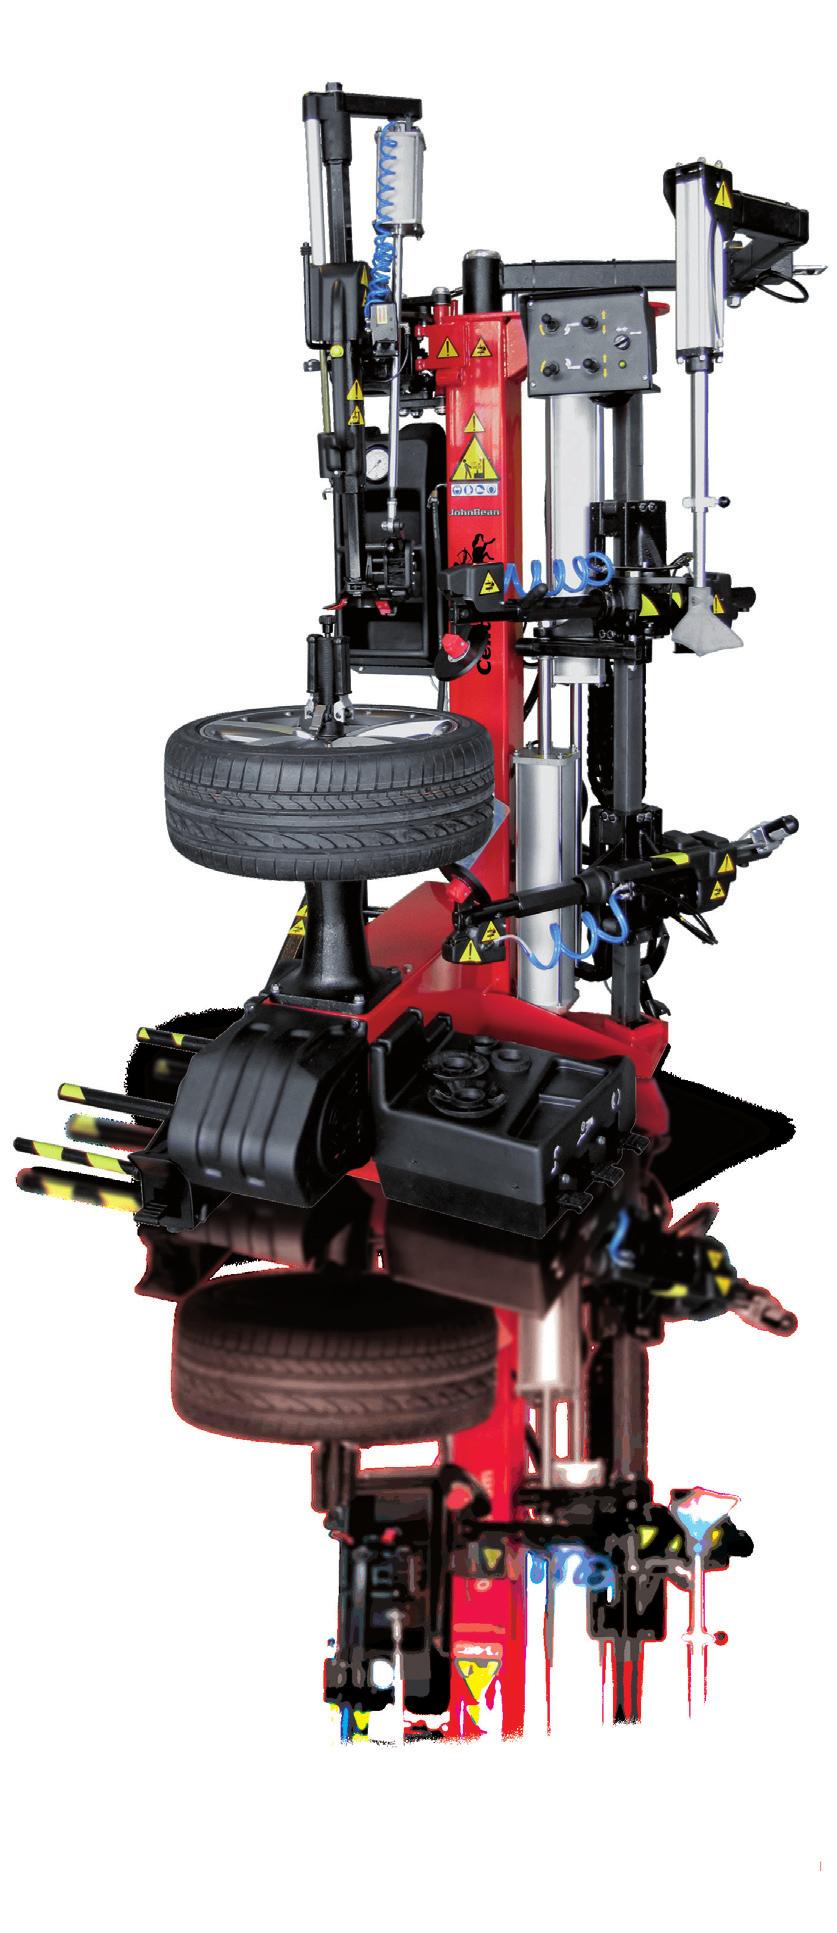 A U T O M AT I C R A N G E T Y R E C H A N G E R S Centaur Platinum Automatic Tyre Changer - EEWH542AE1 The Centaur is a leverless high-productivity tyre changer for passenger car and light van tyres.